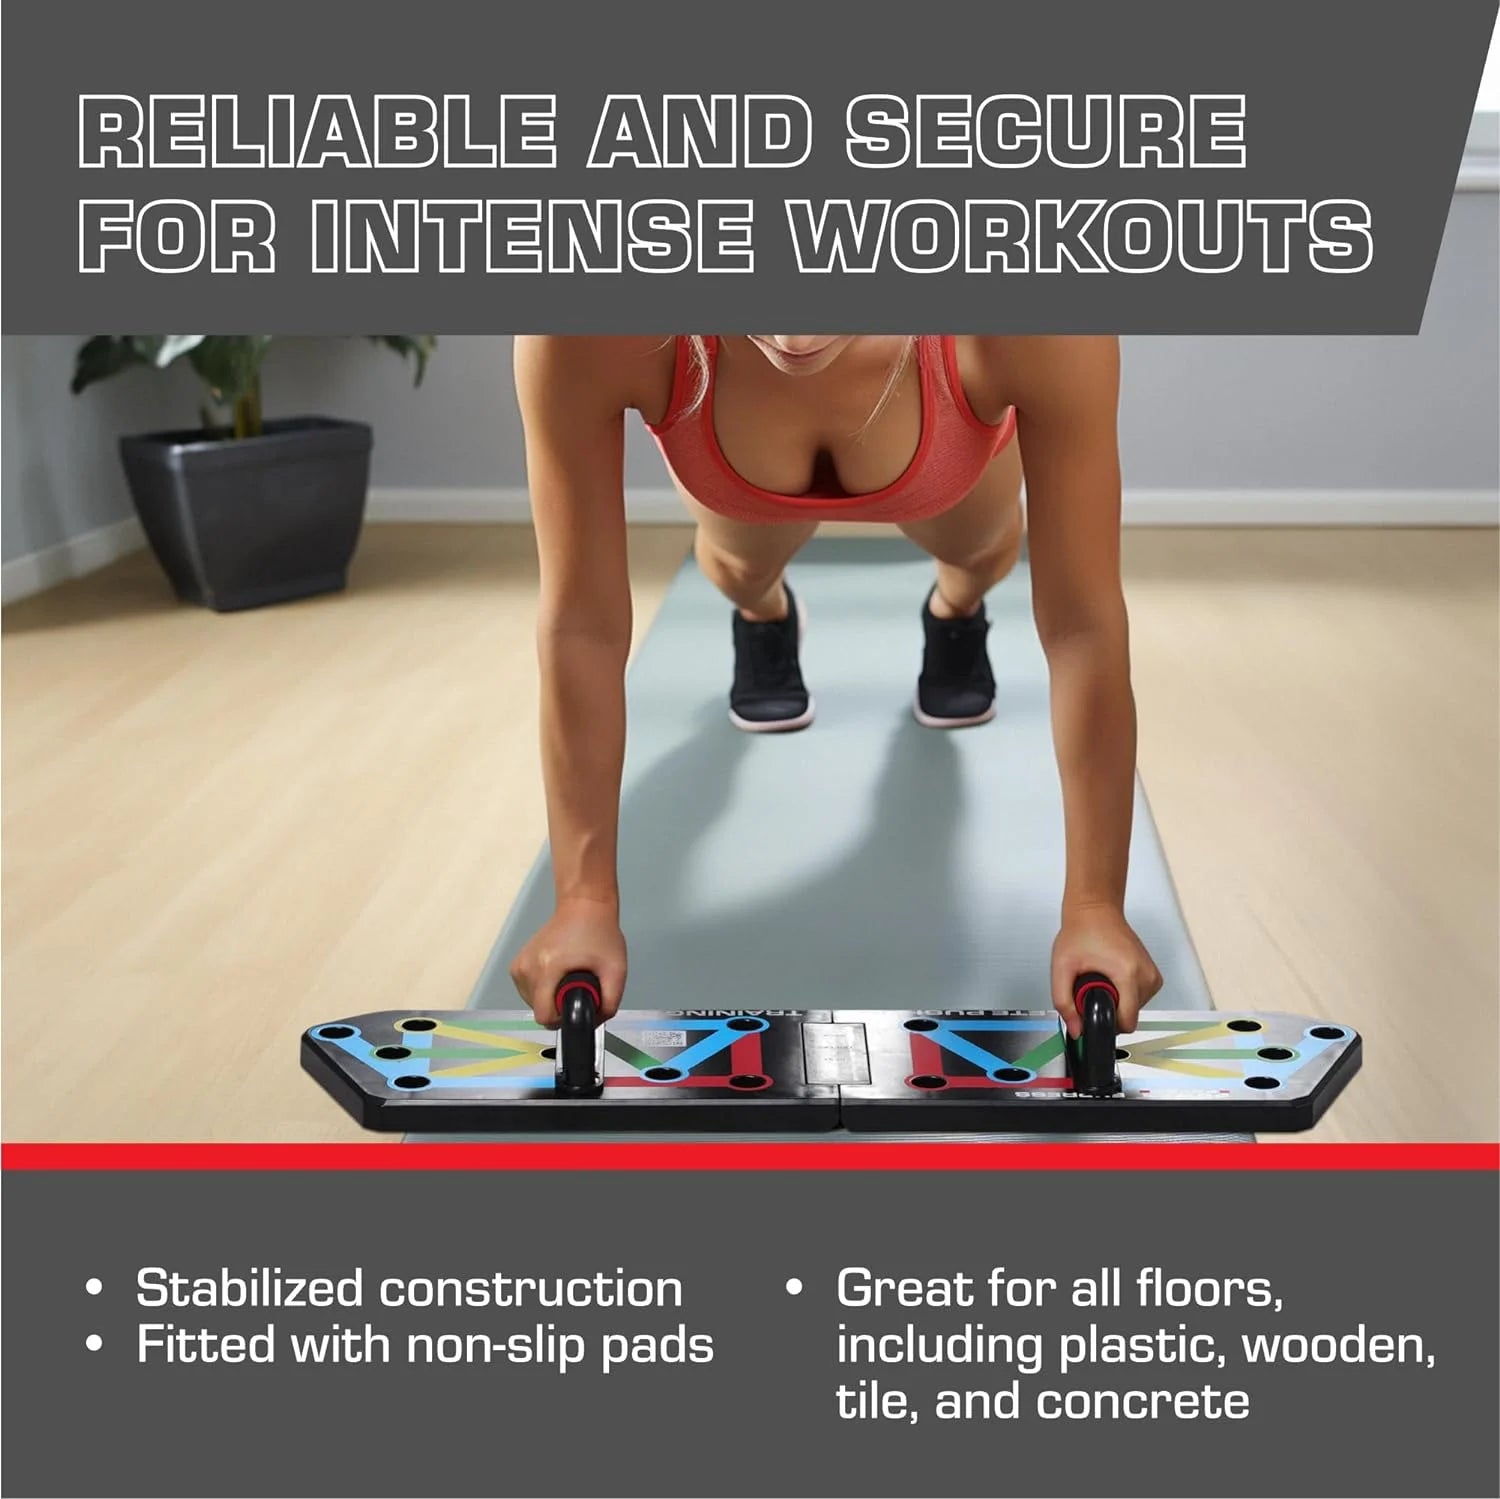 Express Push up Board - Full Upper Body Workout Handles for Perfect Push-Up Form - Exercise Board for Men or Women - Adjustable to Target Muscle Groups